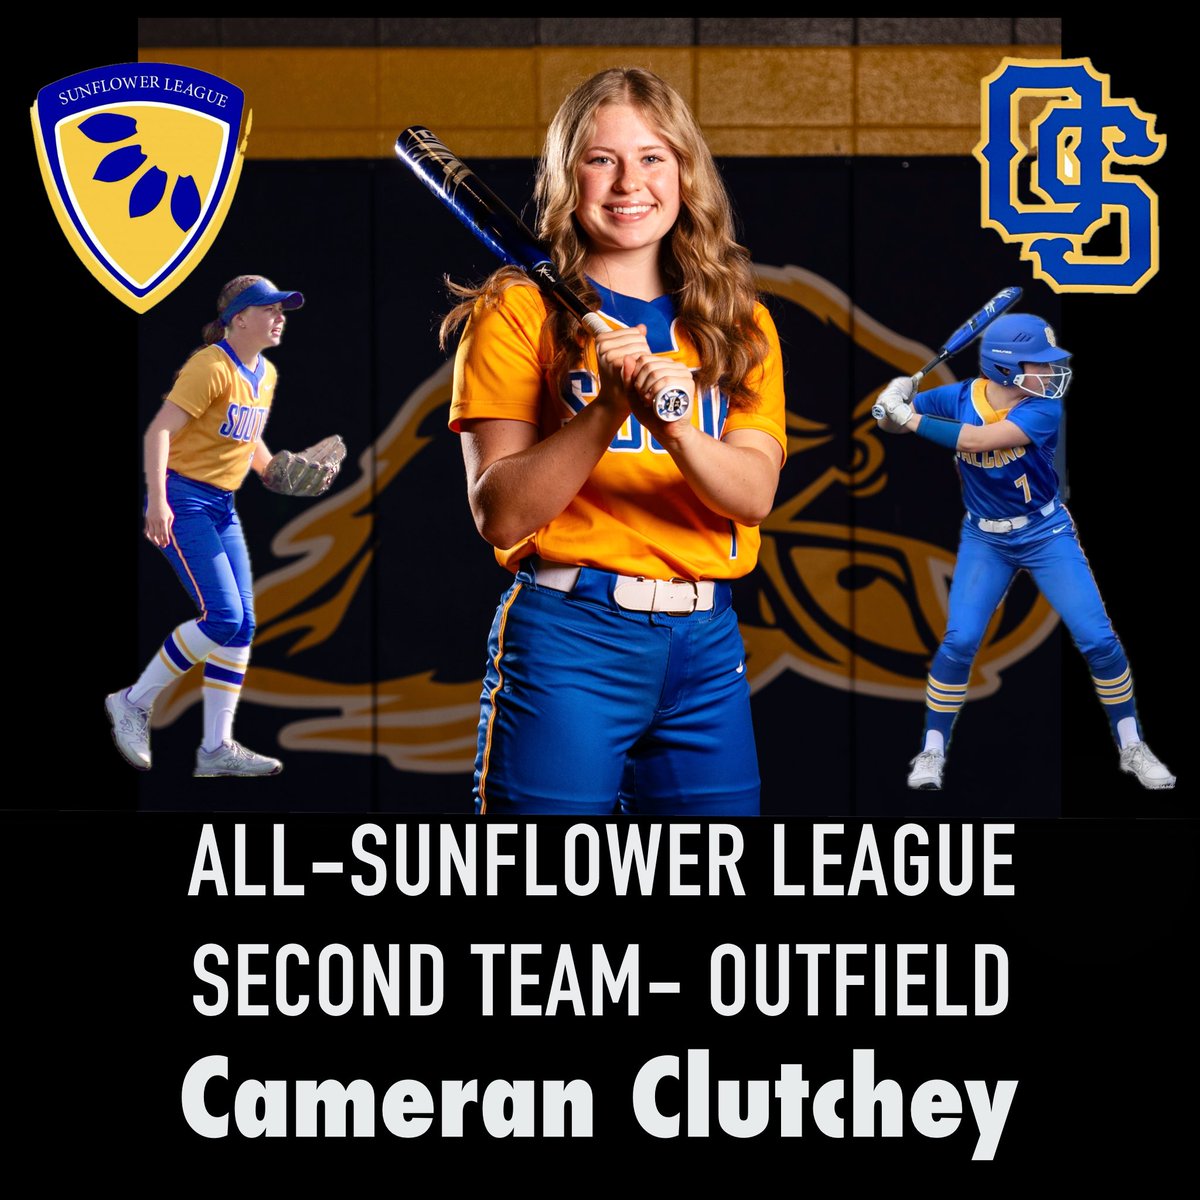 Congrats to sophomore, Cameran Clutchey for earning an All-Sunflower League Second Team- Outfield honor!!!

#EarnIt  
#ProudOfYou